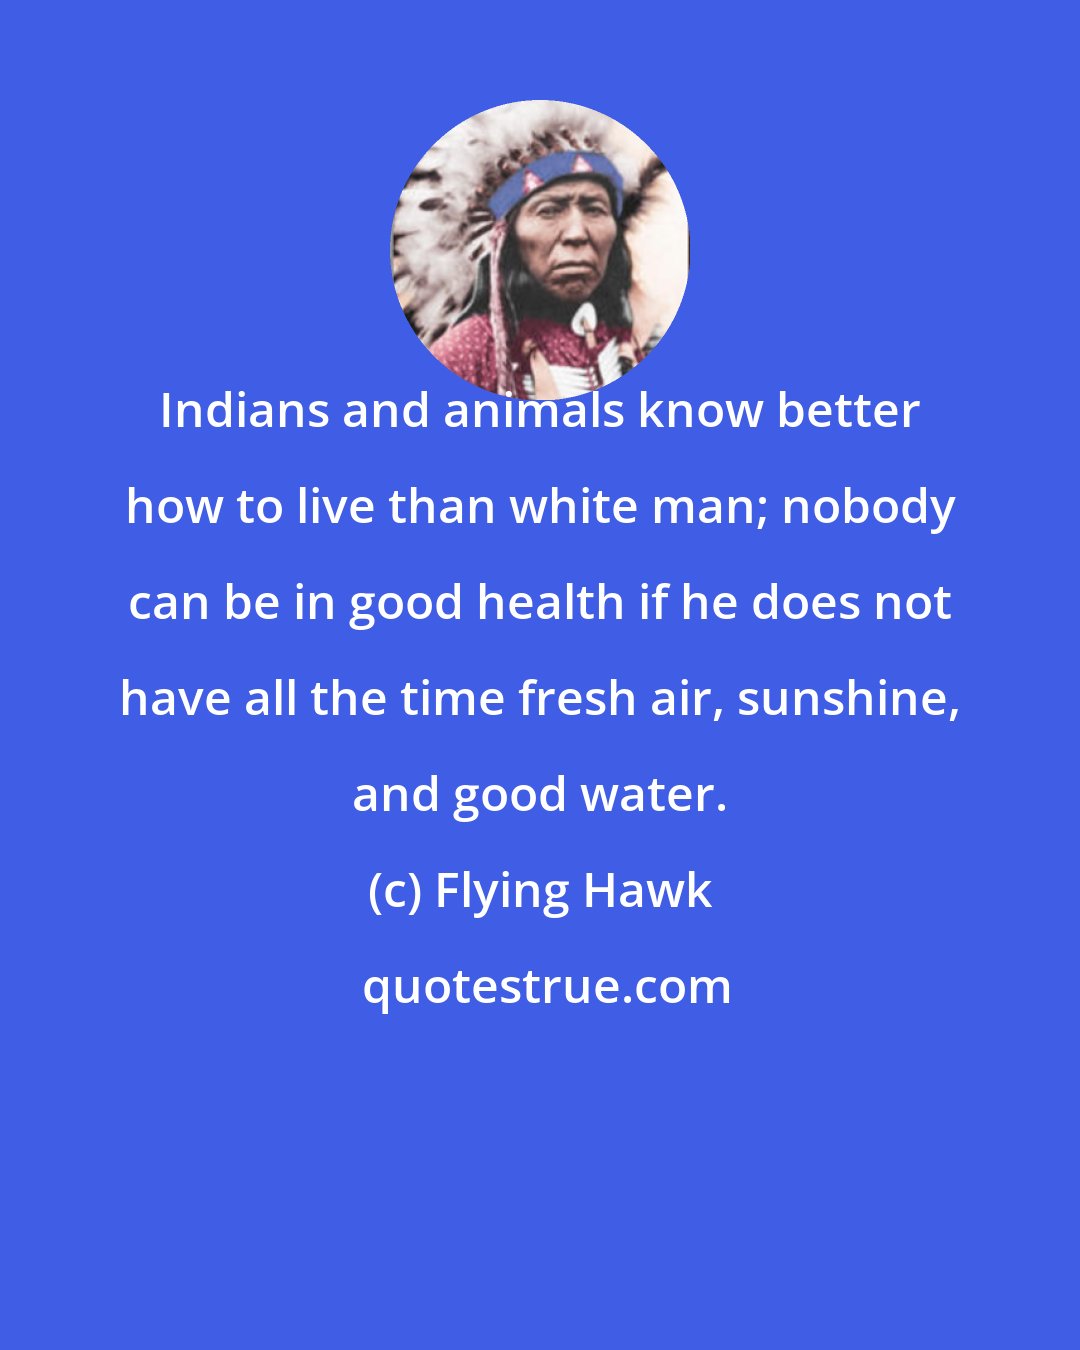 Flying Hawk: Indians and animals know better how to live than white man; nobody can be in good health if he does not have all the time fresh air, sunshine, and good water.